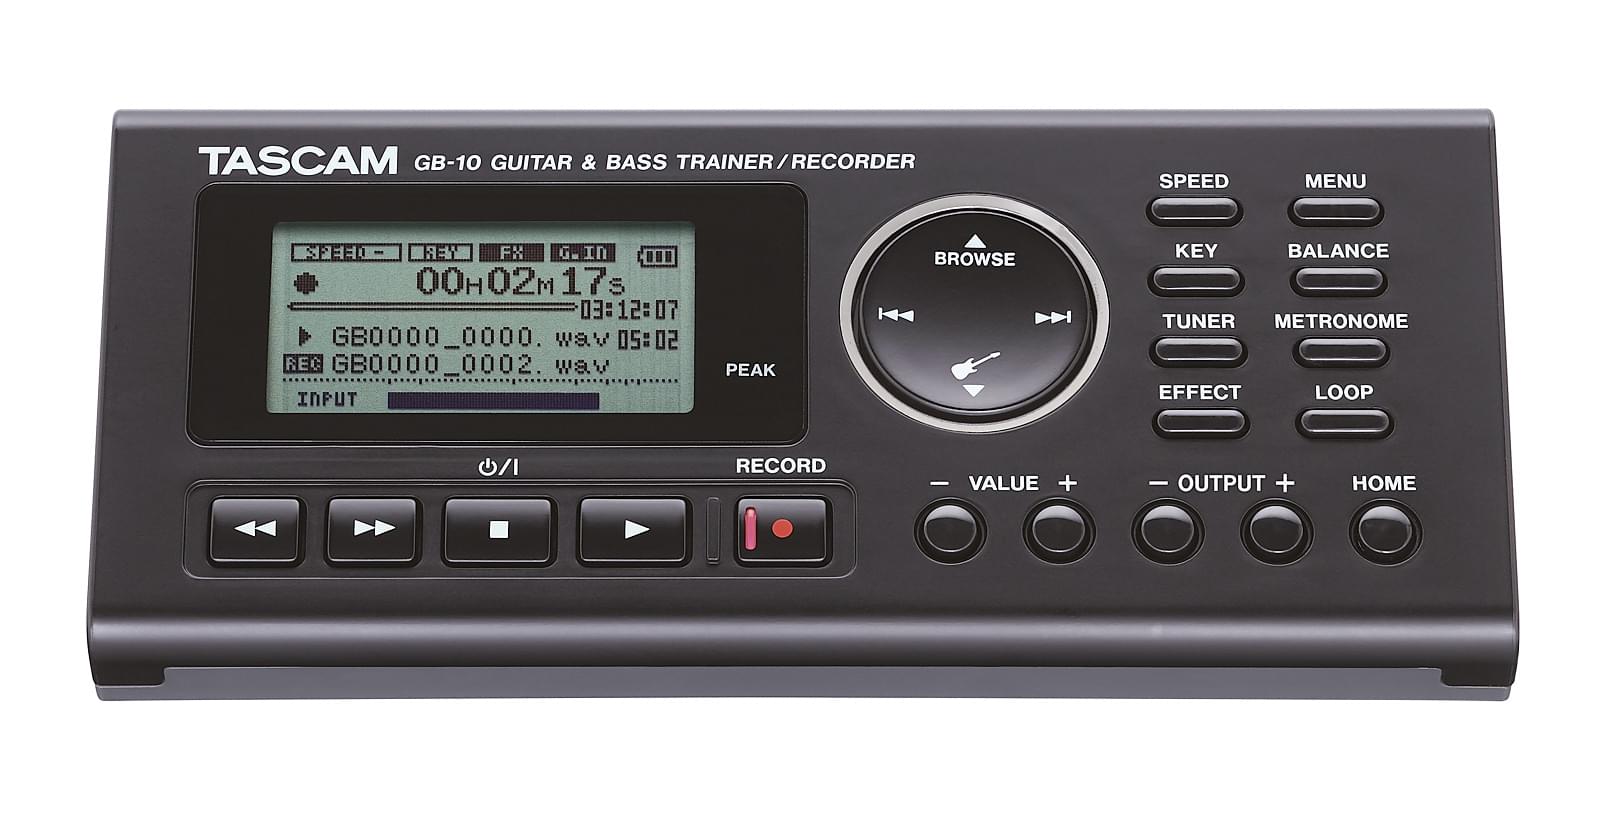 Product Image of Tascam GB-10 Trainer/Recorder for Guitar and Bass